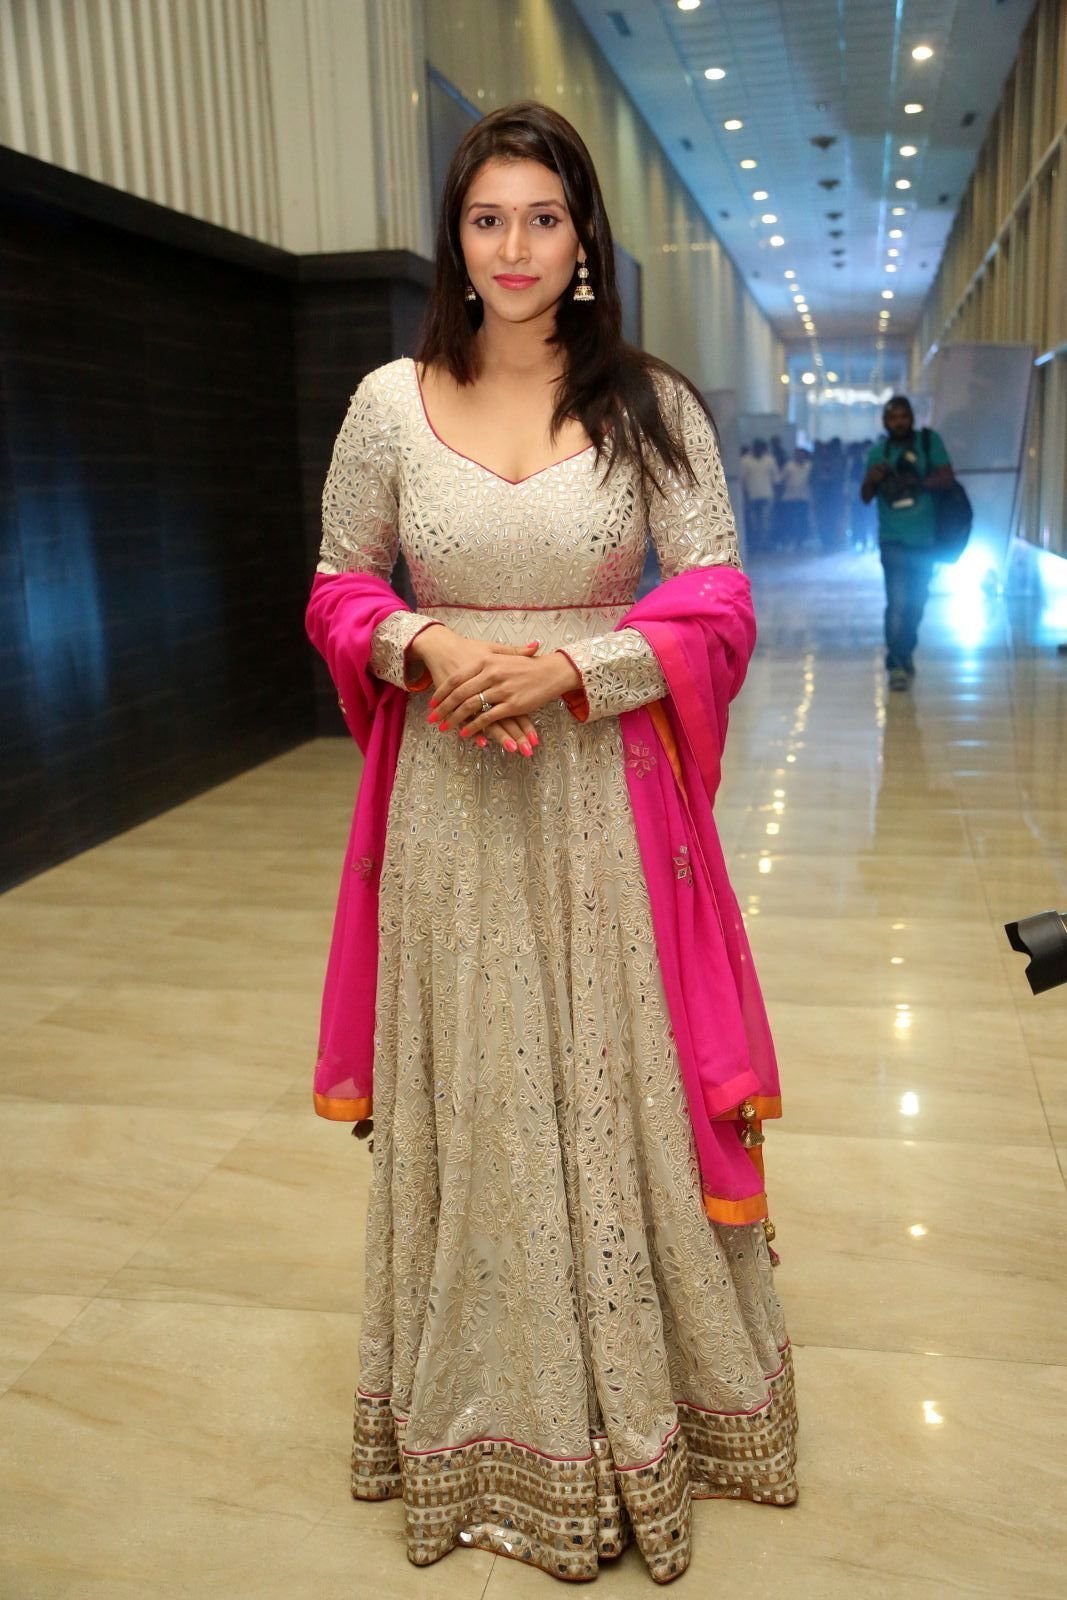 Mannara Chopra Photos At Rogue Audio Release Function | Picture 1481920